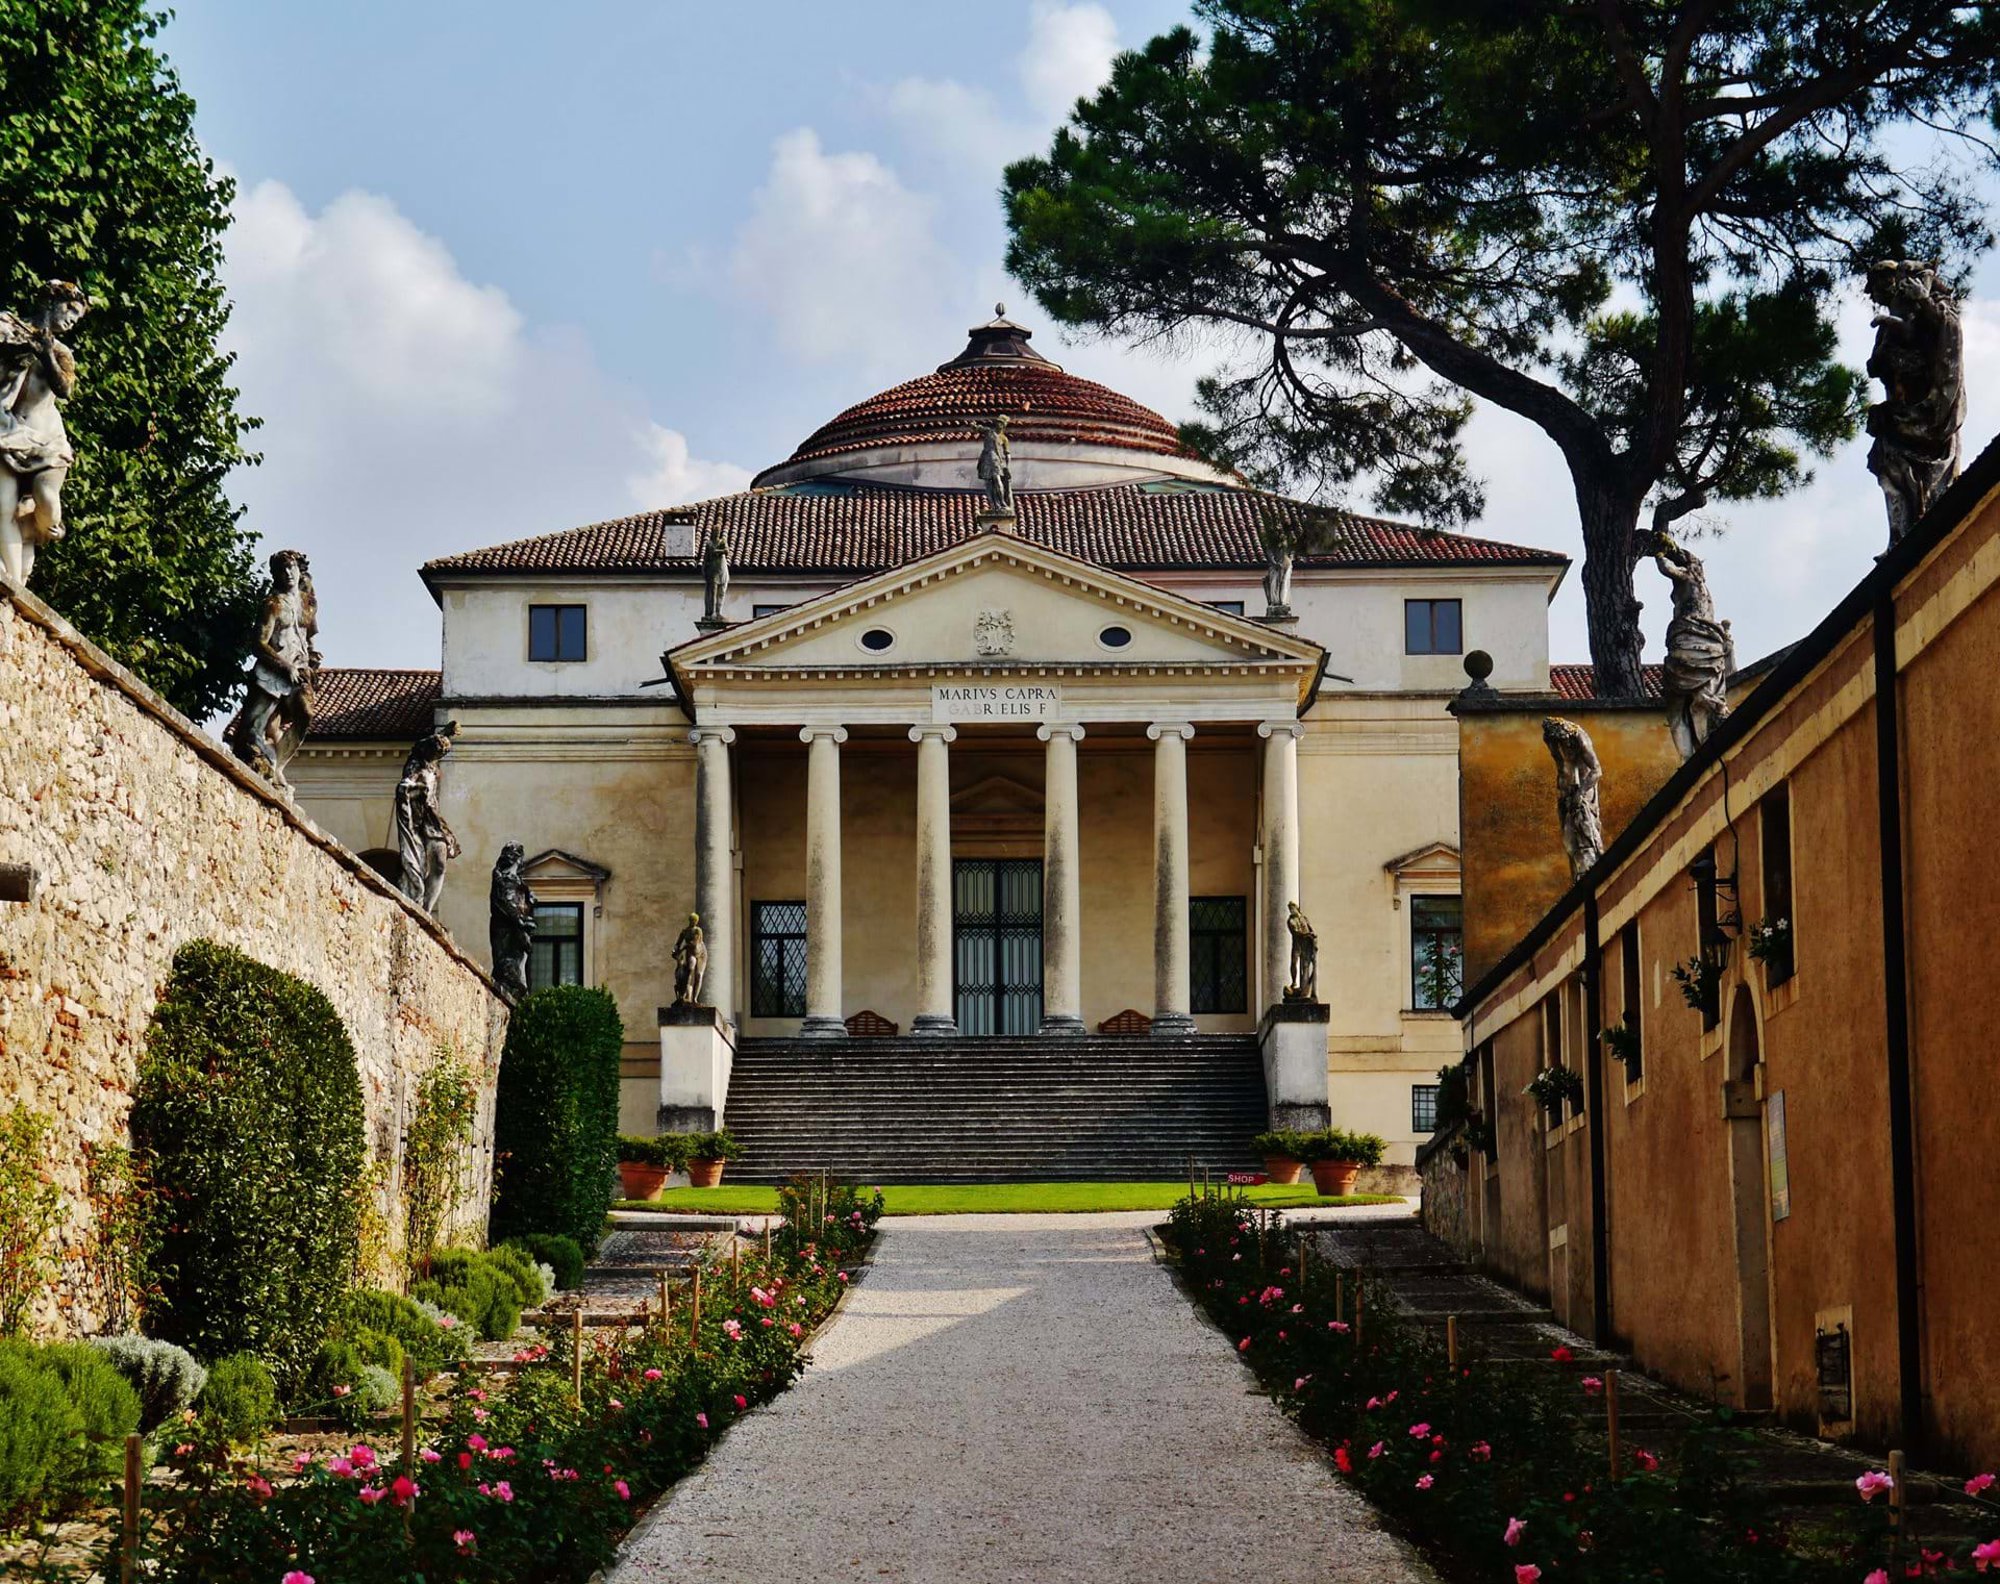 Italian architect Andrea Palladio’s Renaissance Villa la Rotonda, completed after his death in 1580, sat atop a hill outside Vicenza in northern Italy. Palladio’s designs are recognisably inspired by Roman architecture but uniquely distinguishable due to his choice of classical architectural elements and assembly of them in innovative ways. © Zairon CC BY-SA 4.0